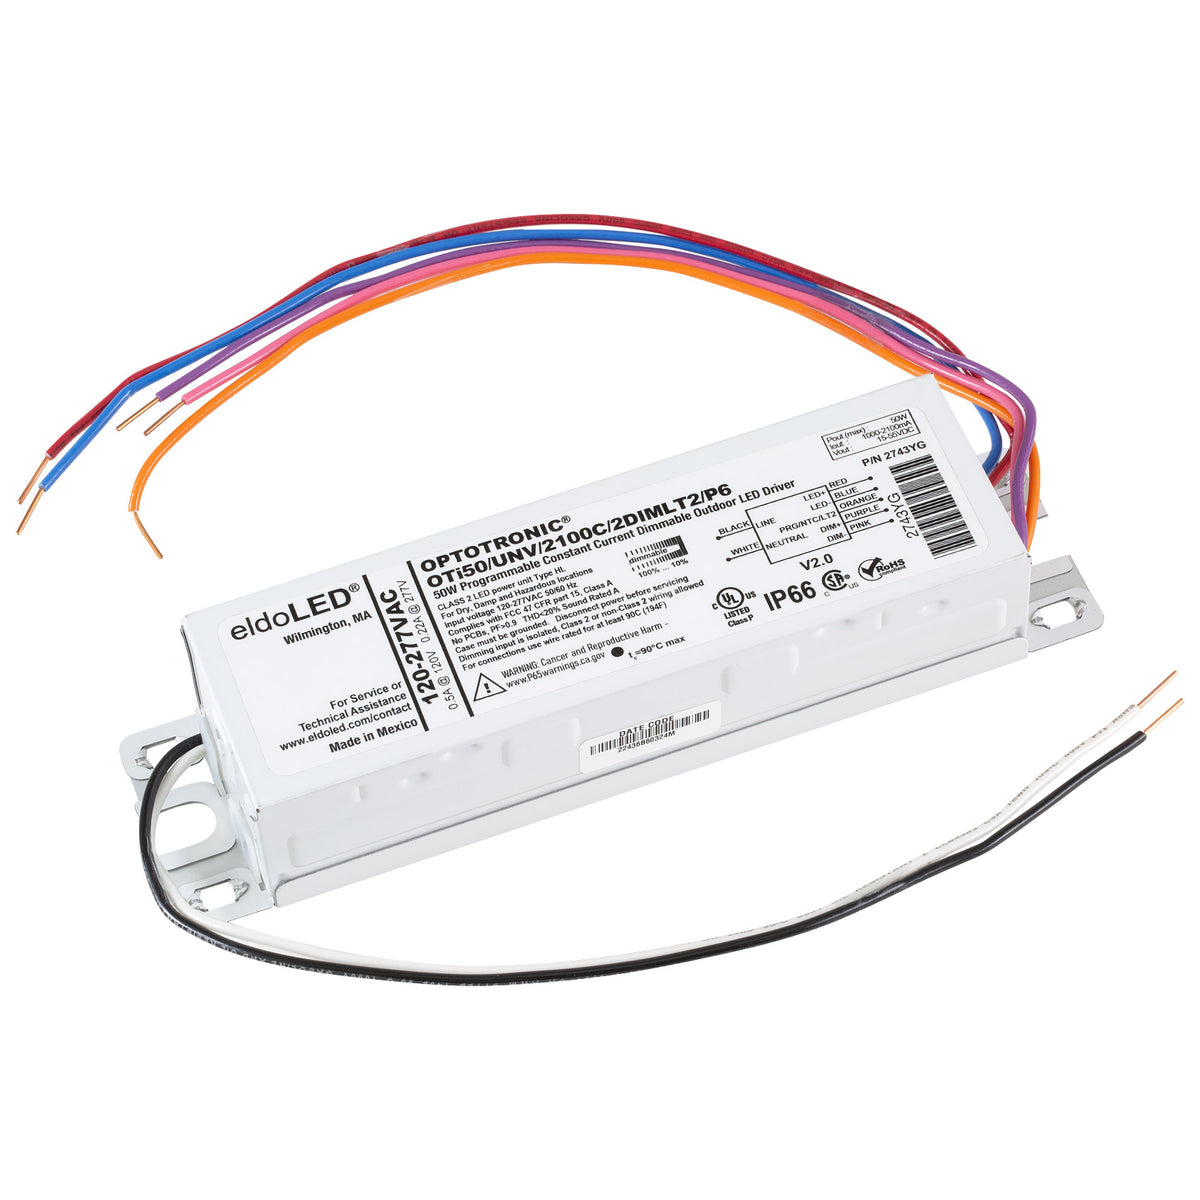 eldoLED *2743YG OPTOTRONIC 50W Constant Current 0-10V Dimmable LED Dri